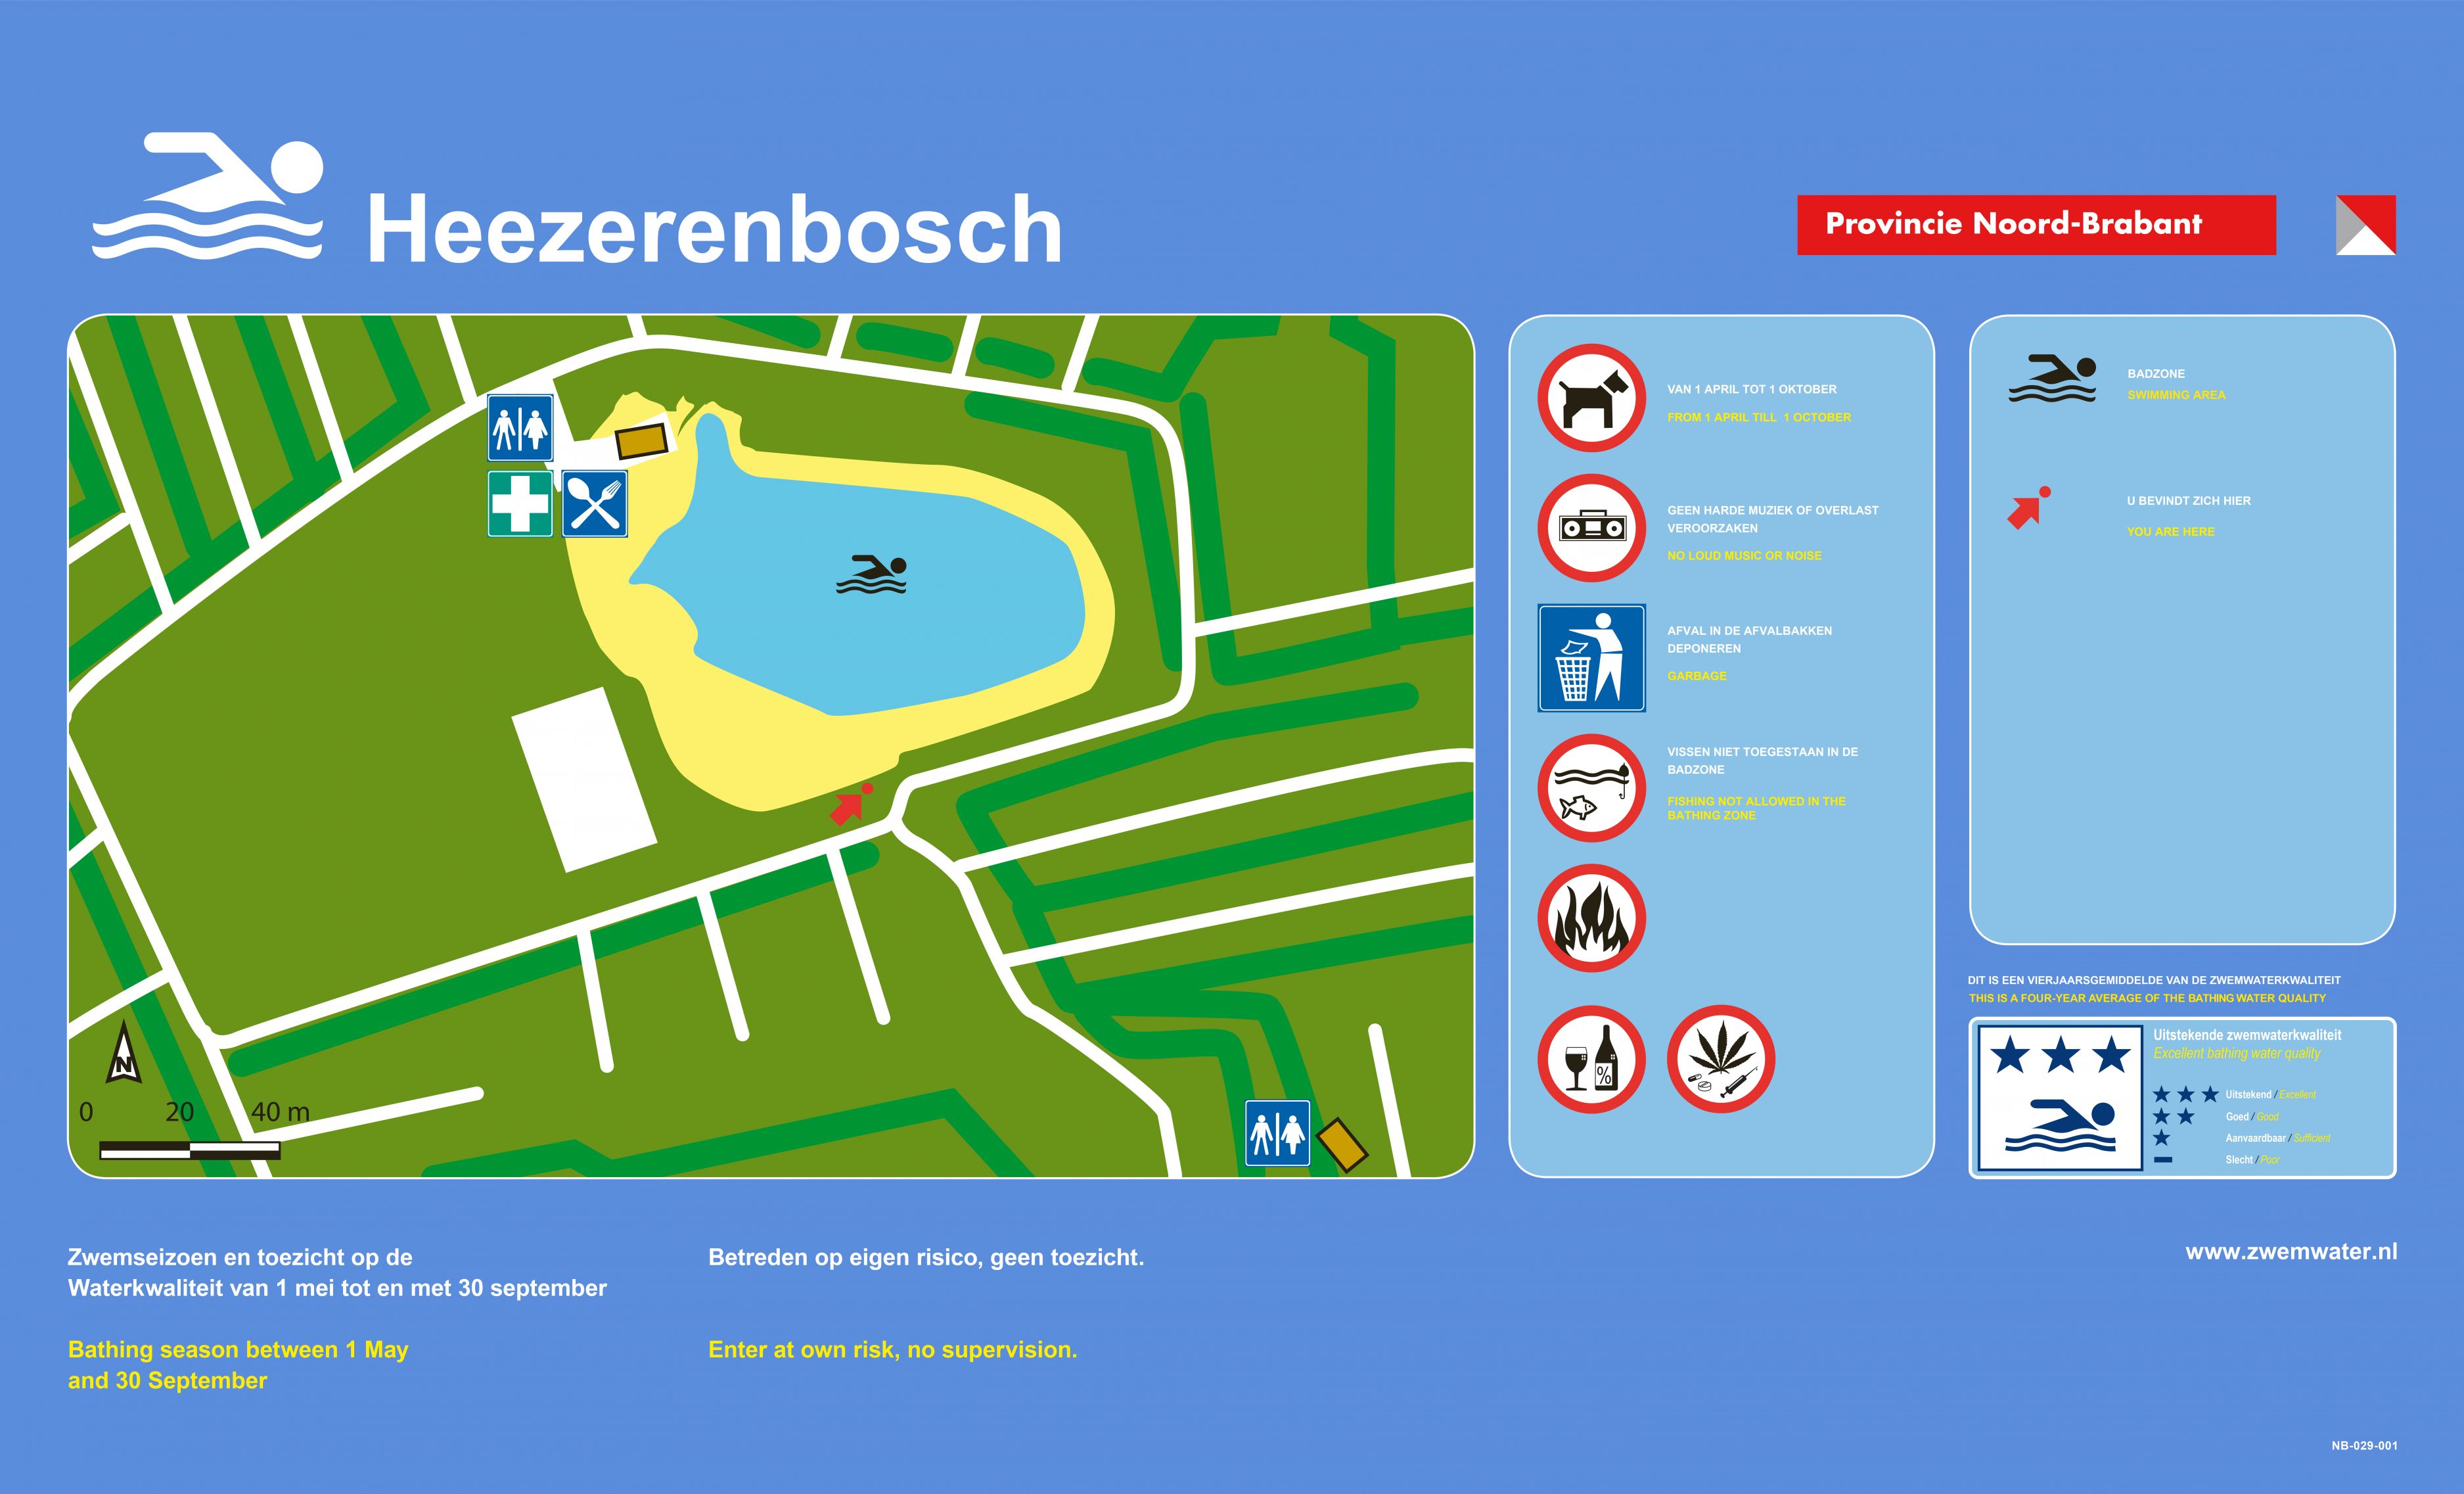 The information board at the swimming location Heezerenbosch, Heeze